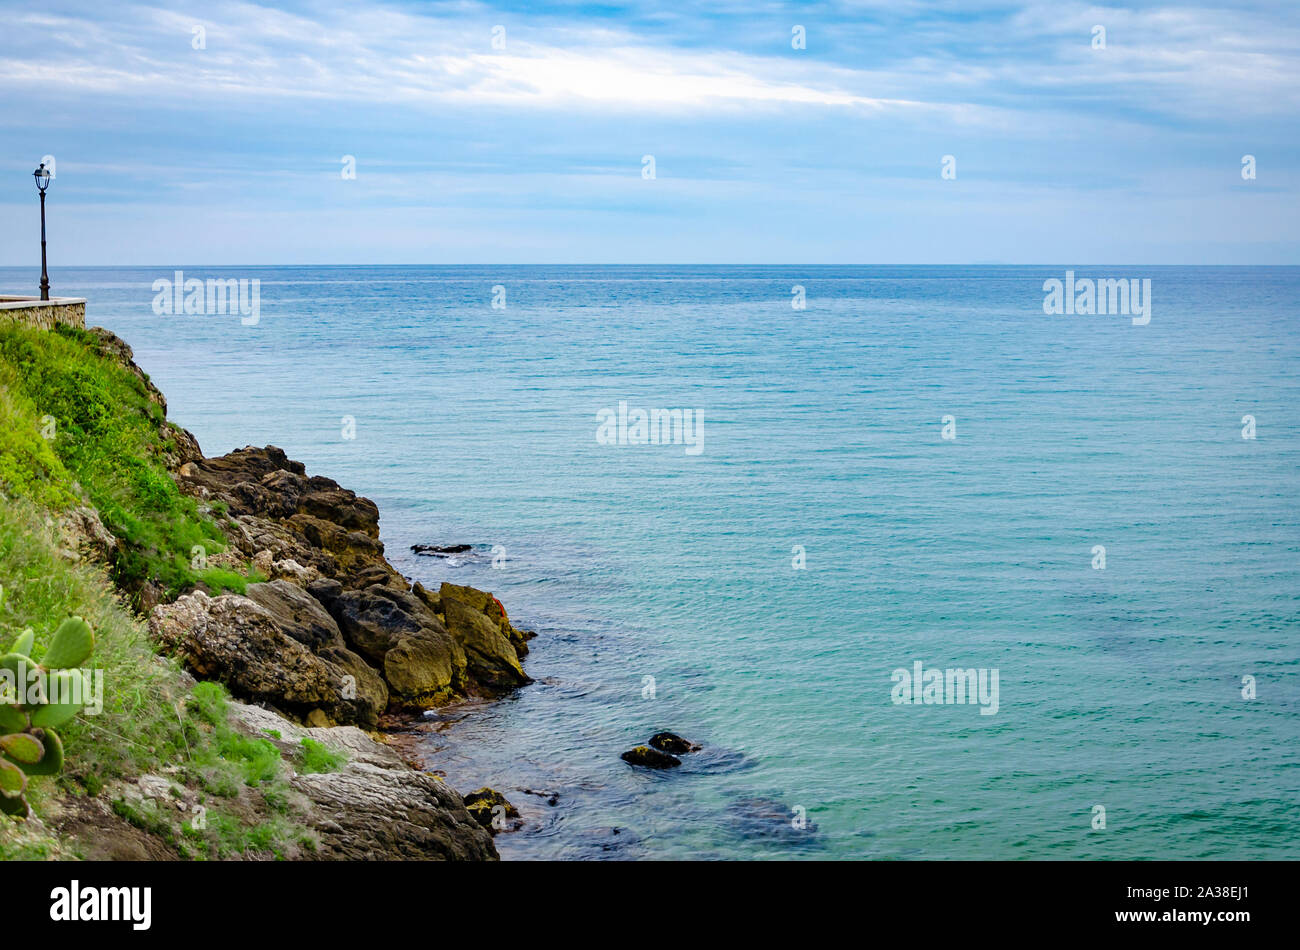 Picturesque sea view with rocks from Sperlonga coast in Italy. Vacation in Europe concept. Copy space Stock Photo